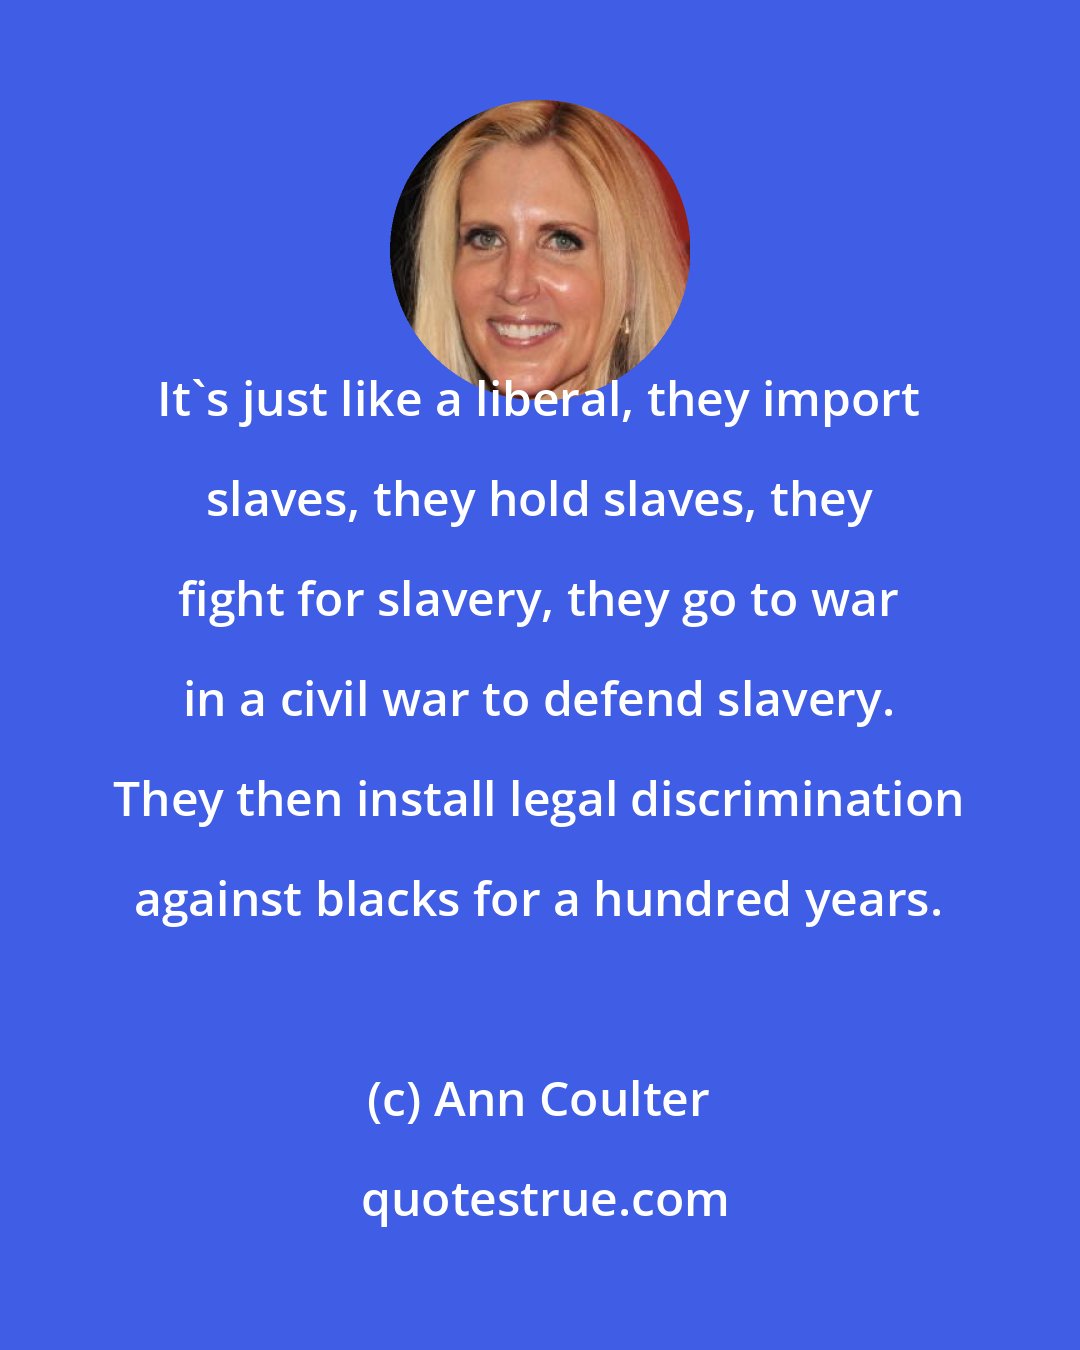 Ann Coulter: It's just like a liberal, they import slaves, they hold slaves, they fight for slavery, they go to war in a civil war to defend slavery. They then install legal discrimination against blacks for a hundred years.